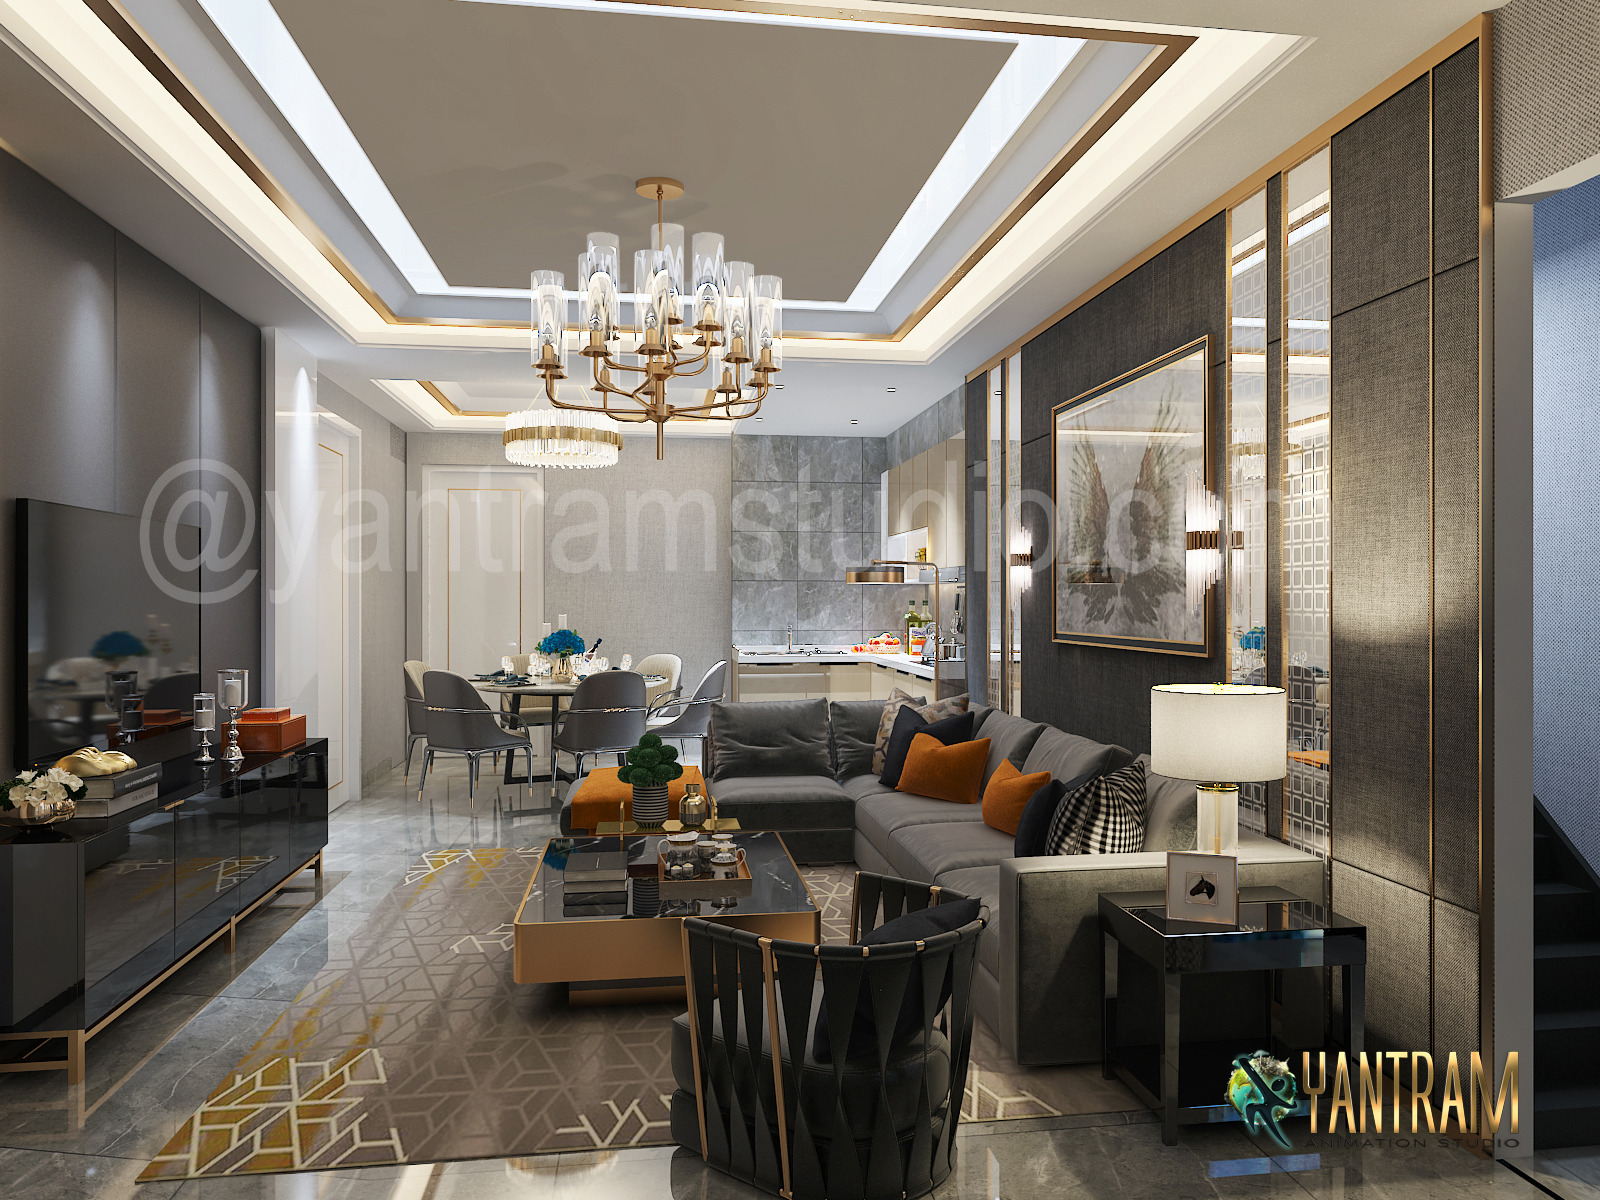 3D Architectural Animation Services to Living Room of Condo